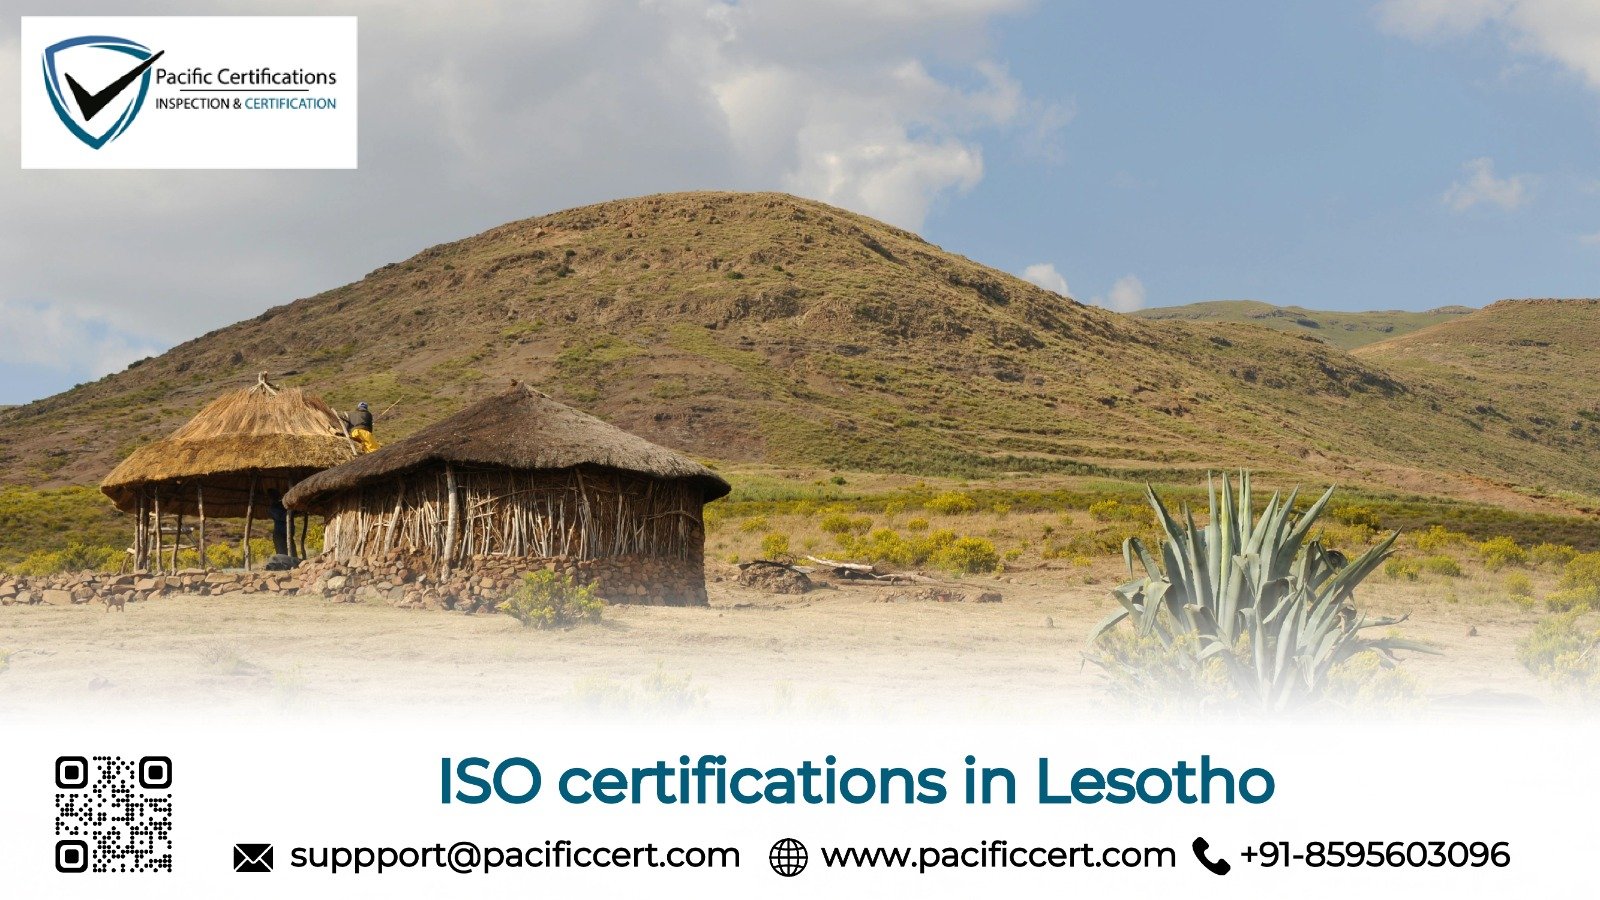 ISO Certifications in Lesotho and How Pacific Certifications can help